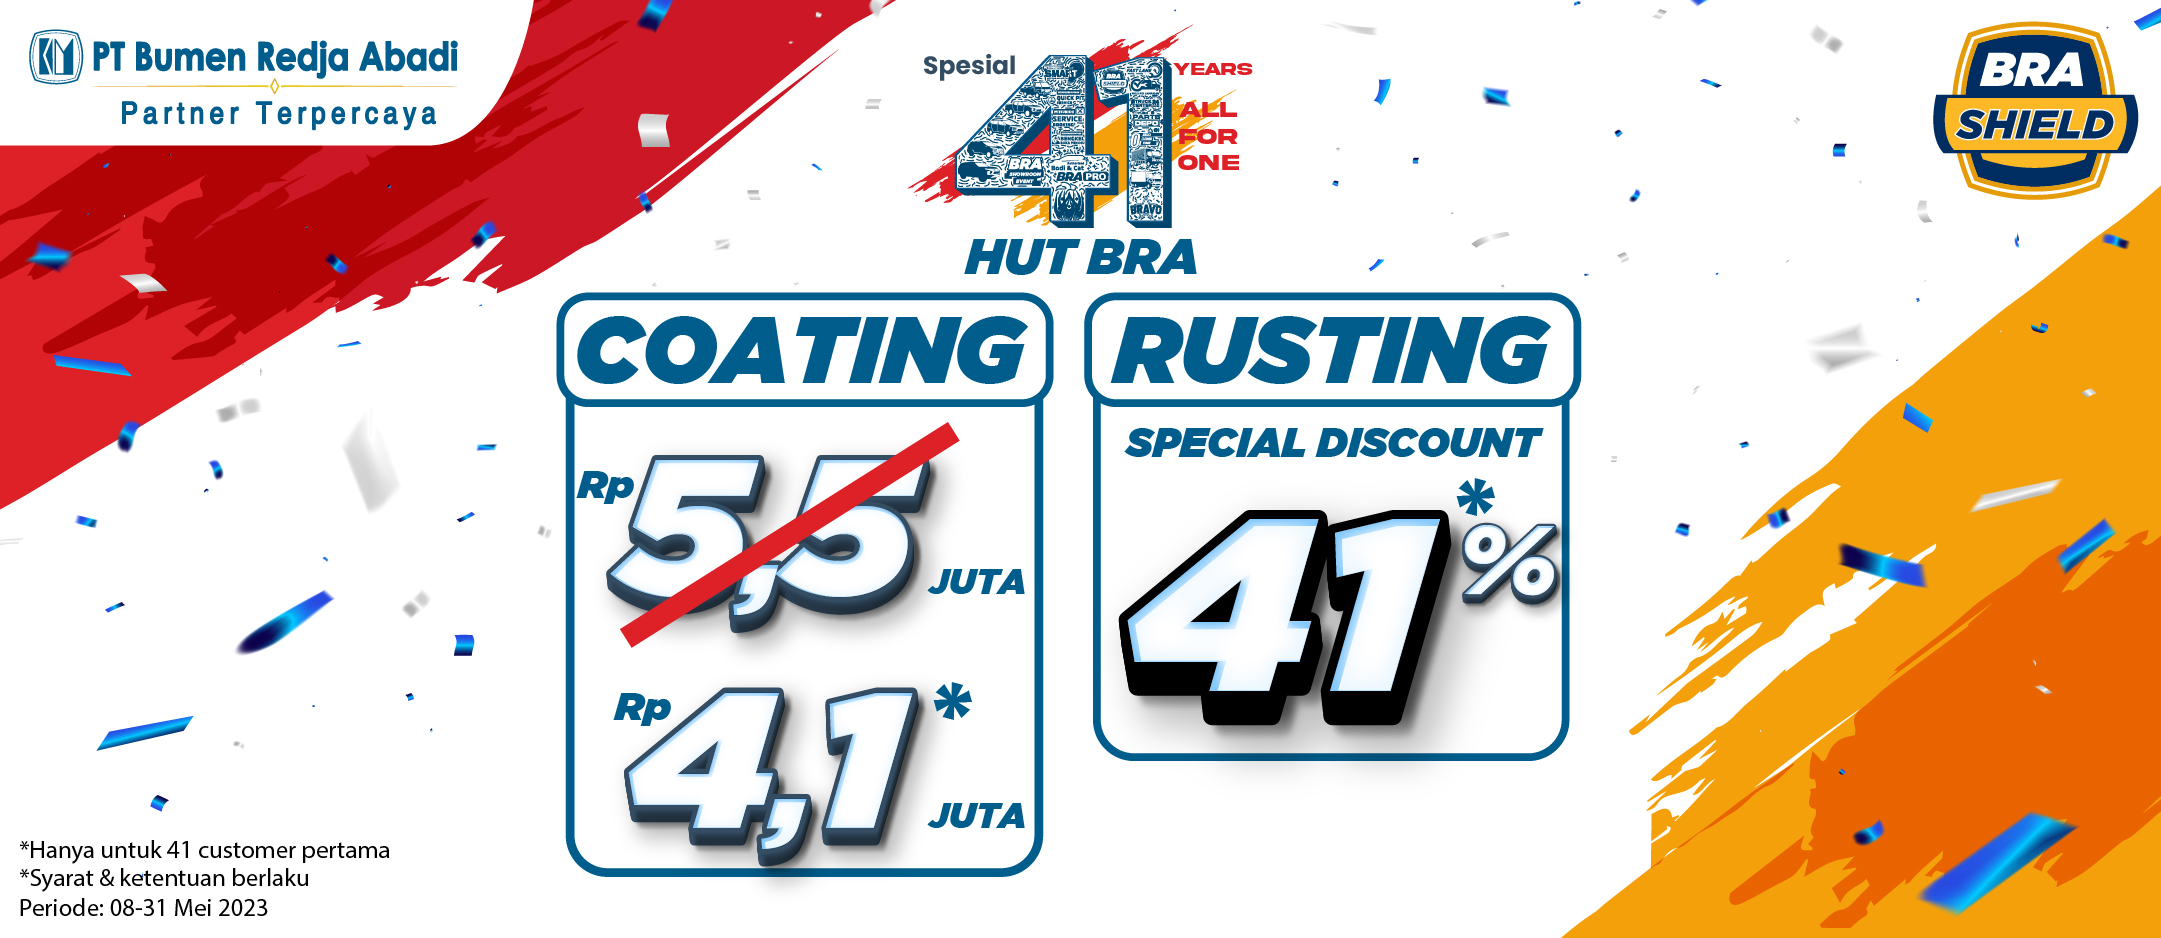 Special Discount Coating & Rusting 